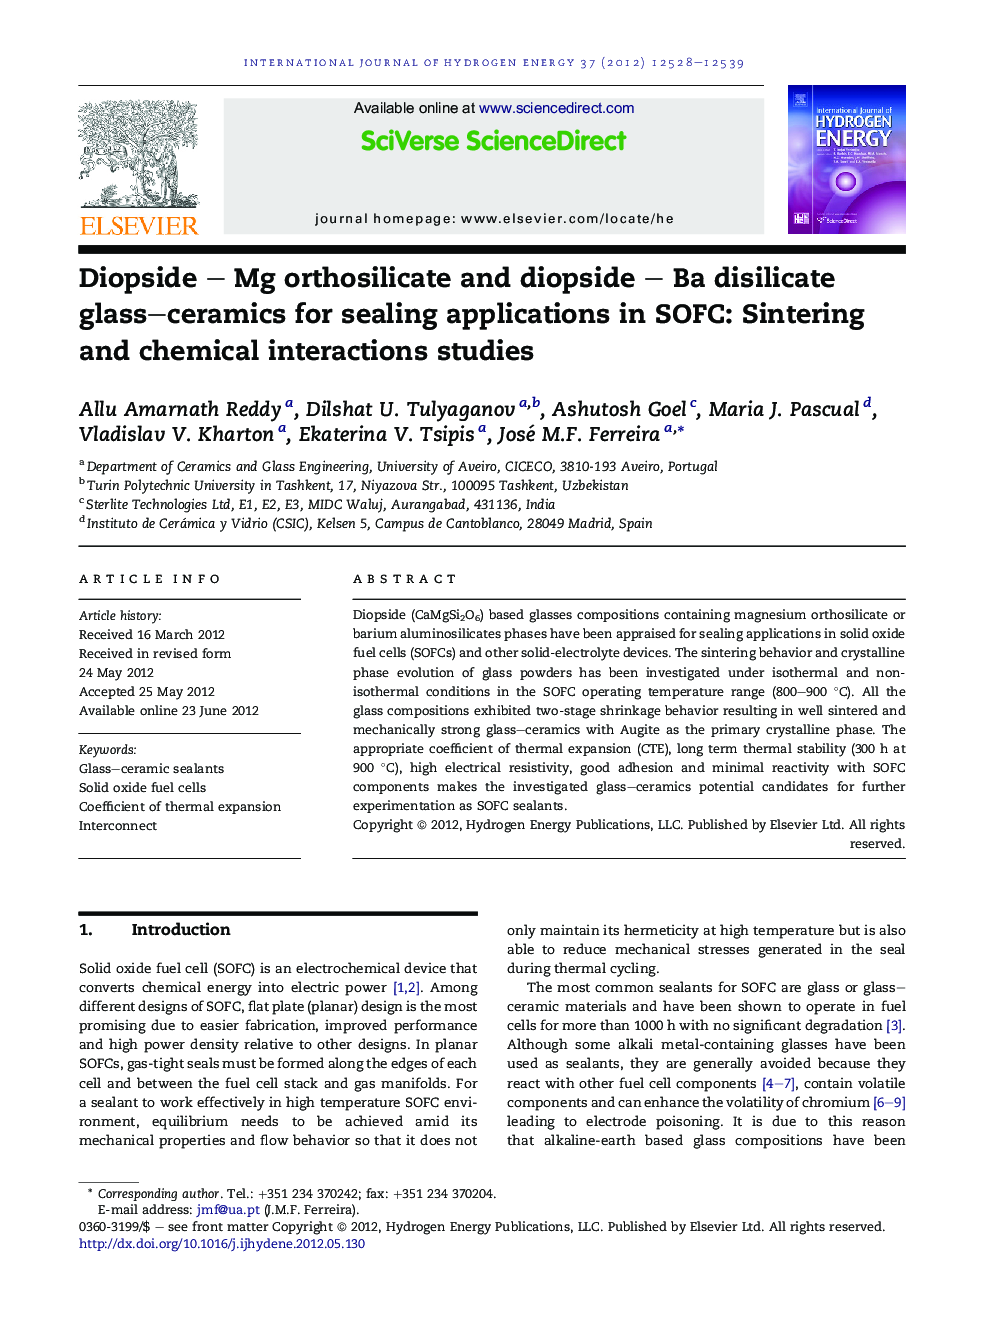 Diopside – Mg orthosilicate and diopside – Ba disilicate glass–ceramics for sealing applications in SOFC: Sintering and chemical interactions studies